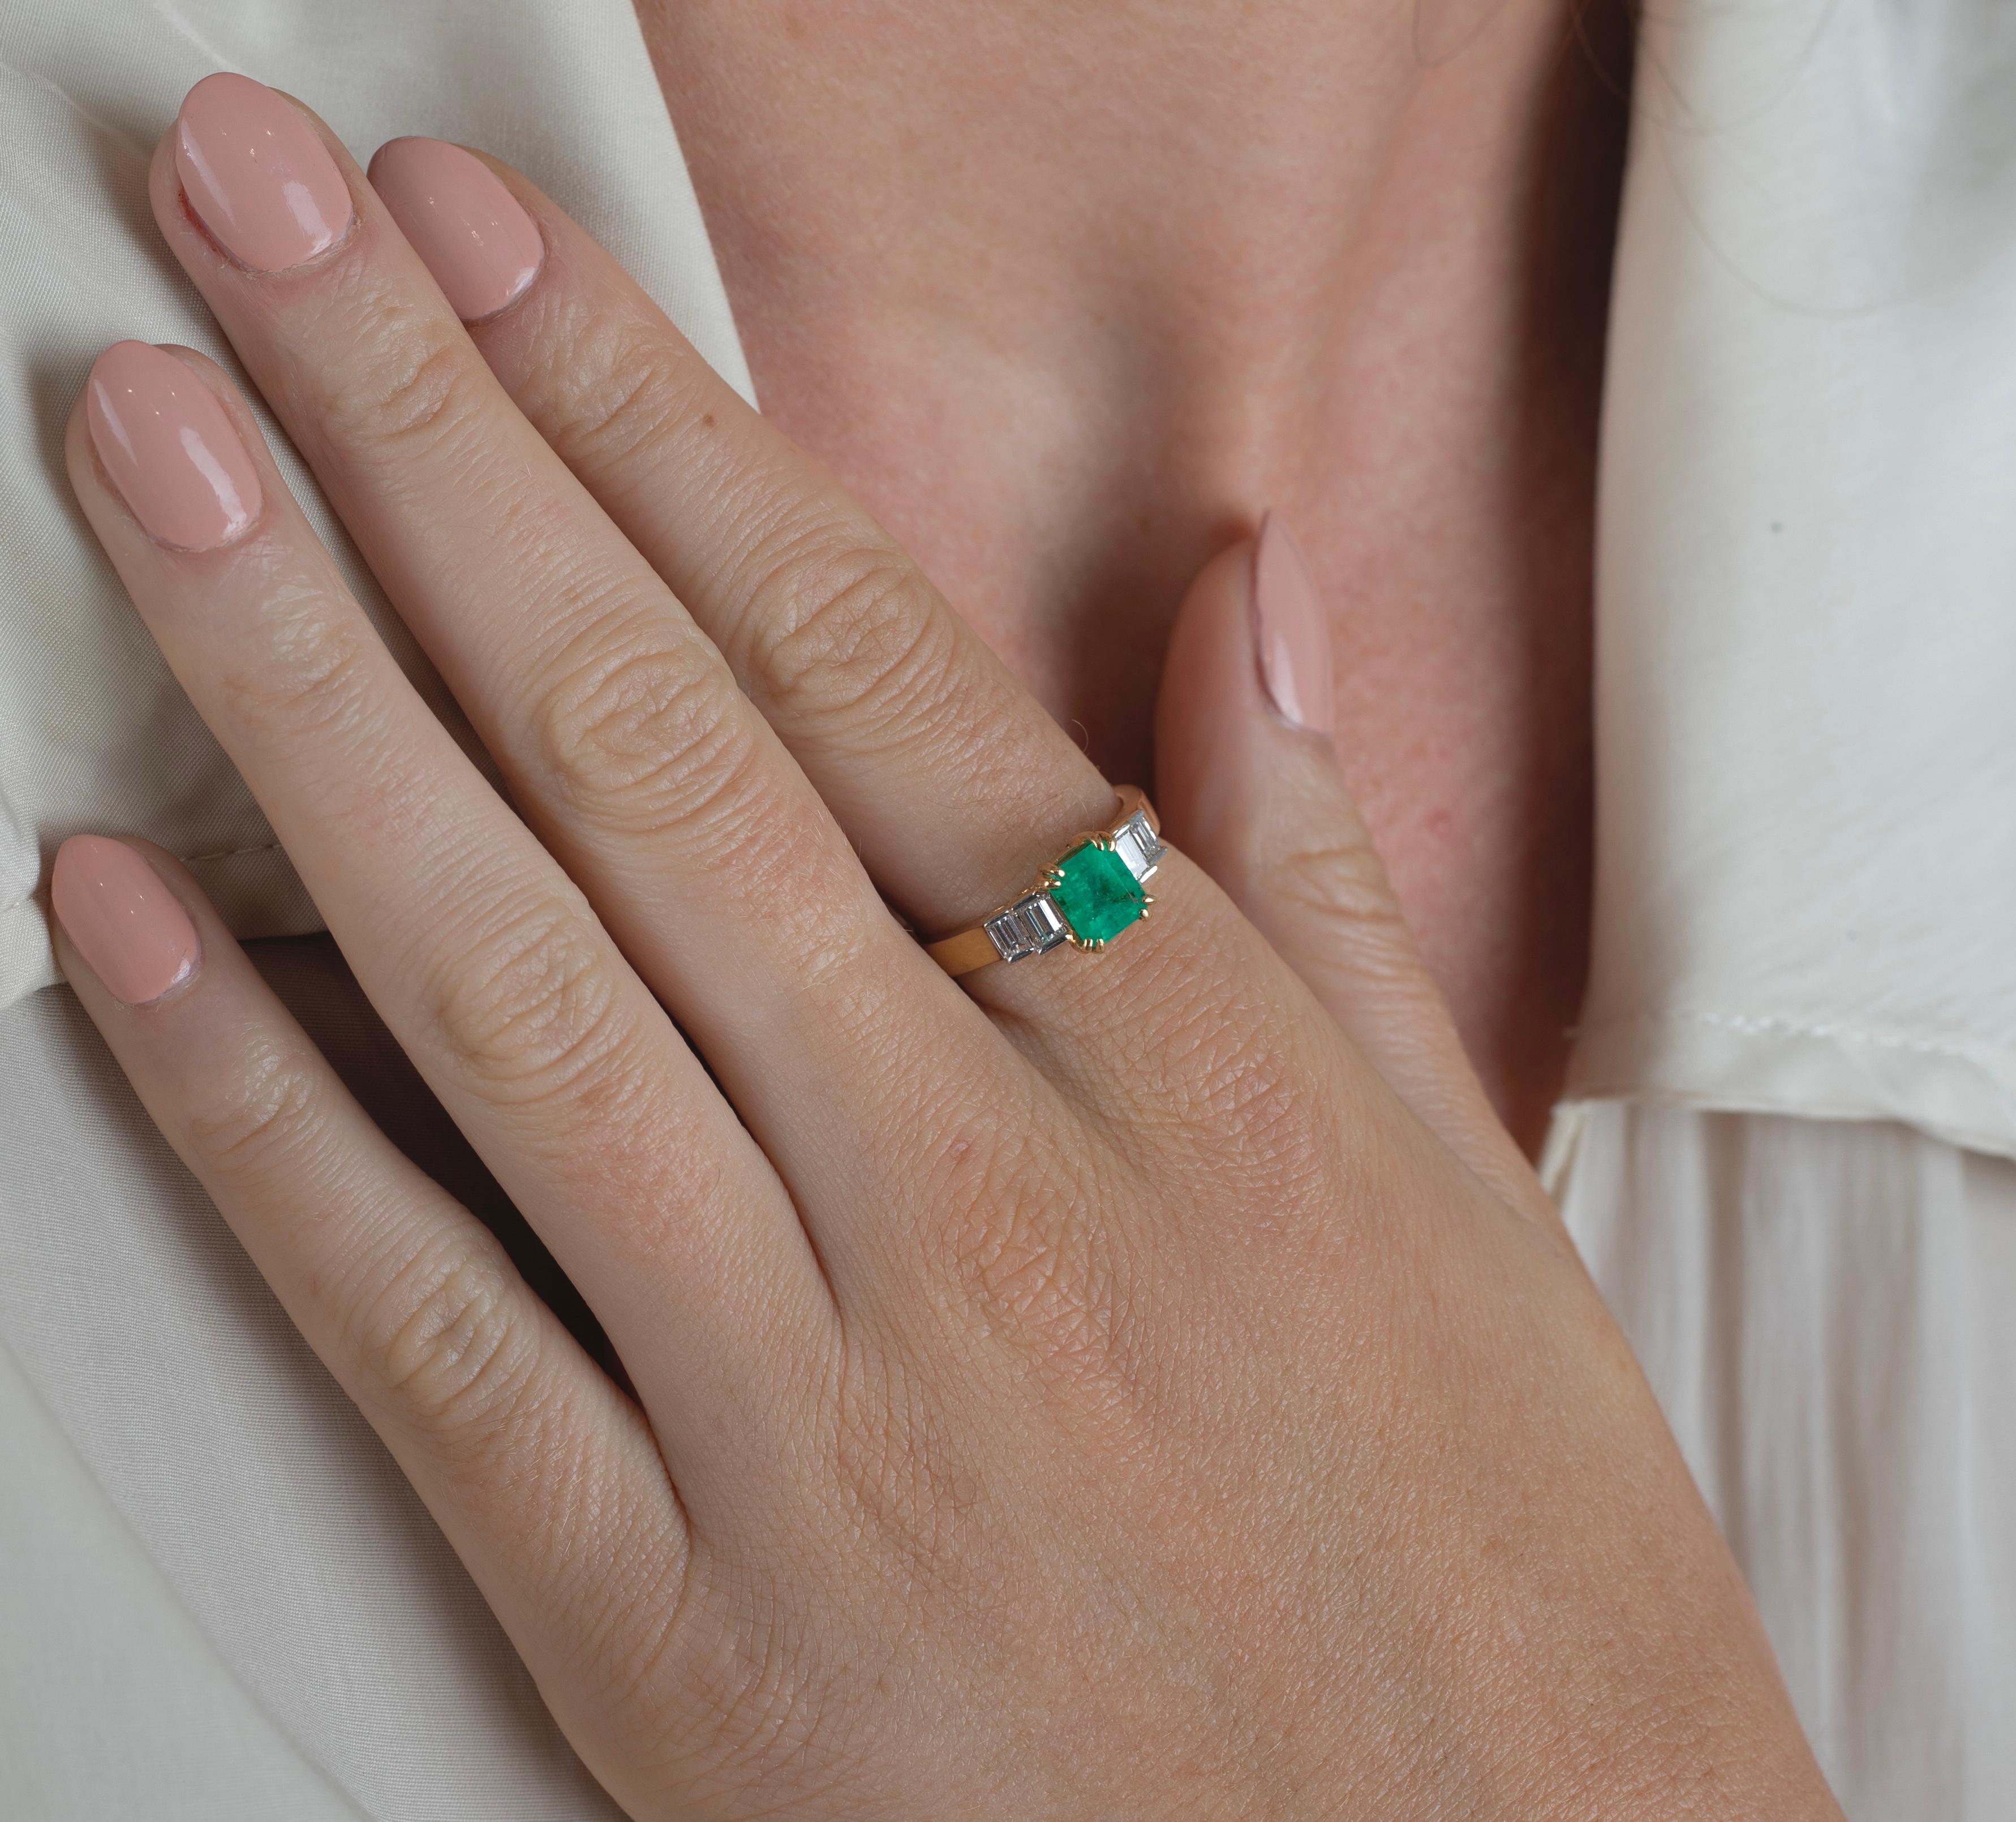 Centering a 1.5 carat, Emerald-Cut Colombian Emerald, flanked by 4 Baguette-Cut Diamonds and set in 18K Yellow Gold. 

Details: 
✔ Stone: Emerald
✔ Stone Cut: Emerald 
✔ Emerald Weight: 1.5
✔ Emerald Origin: Colombia
✔ Setting: 18K Yellow Gold,